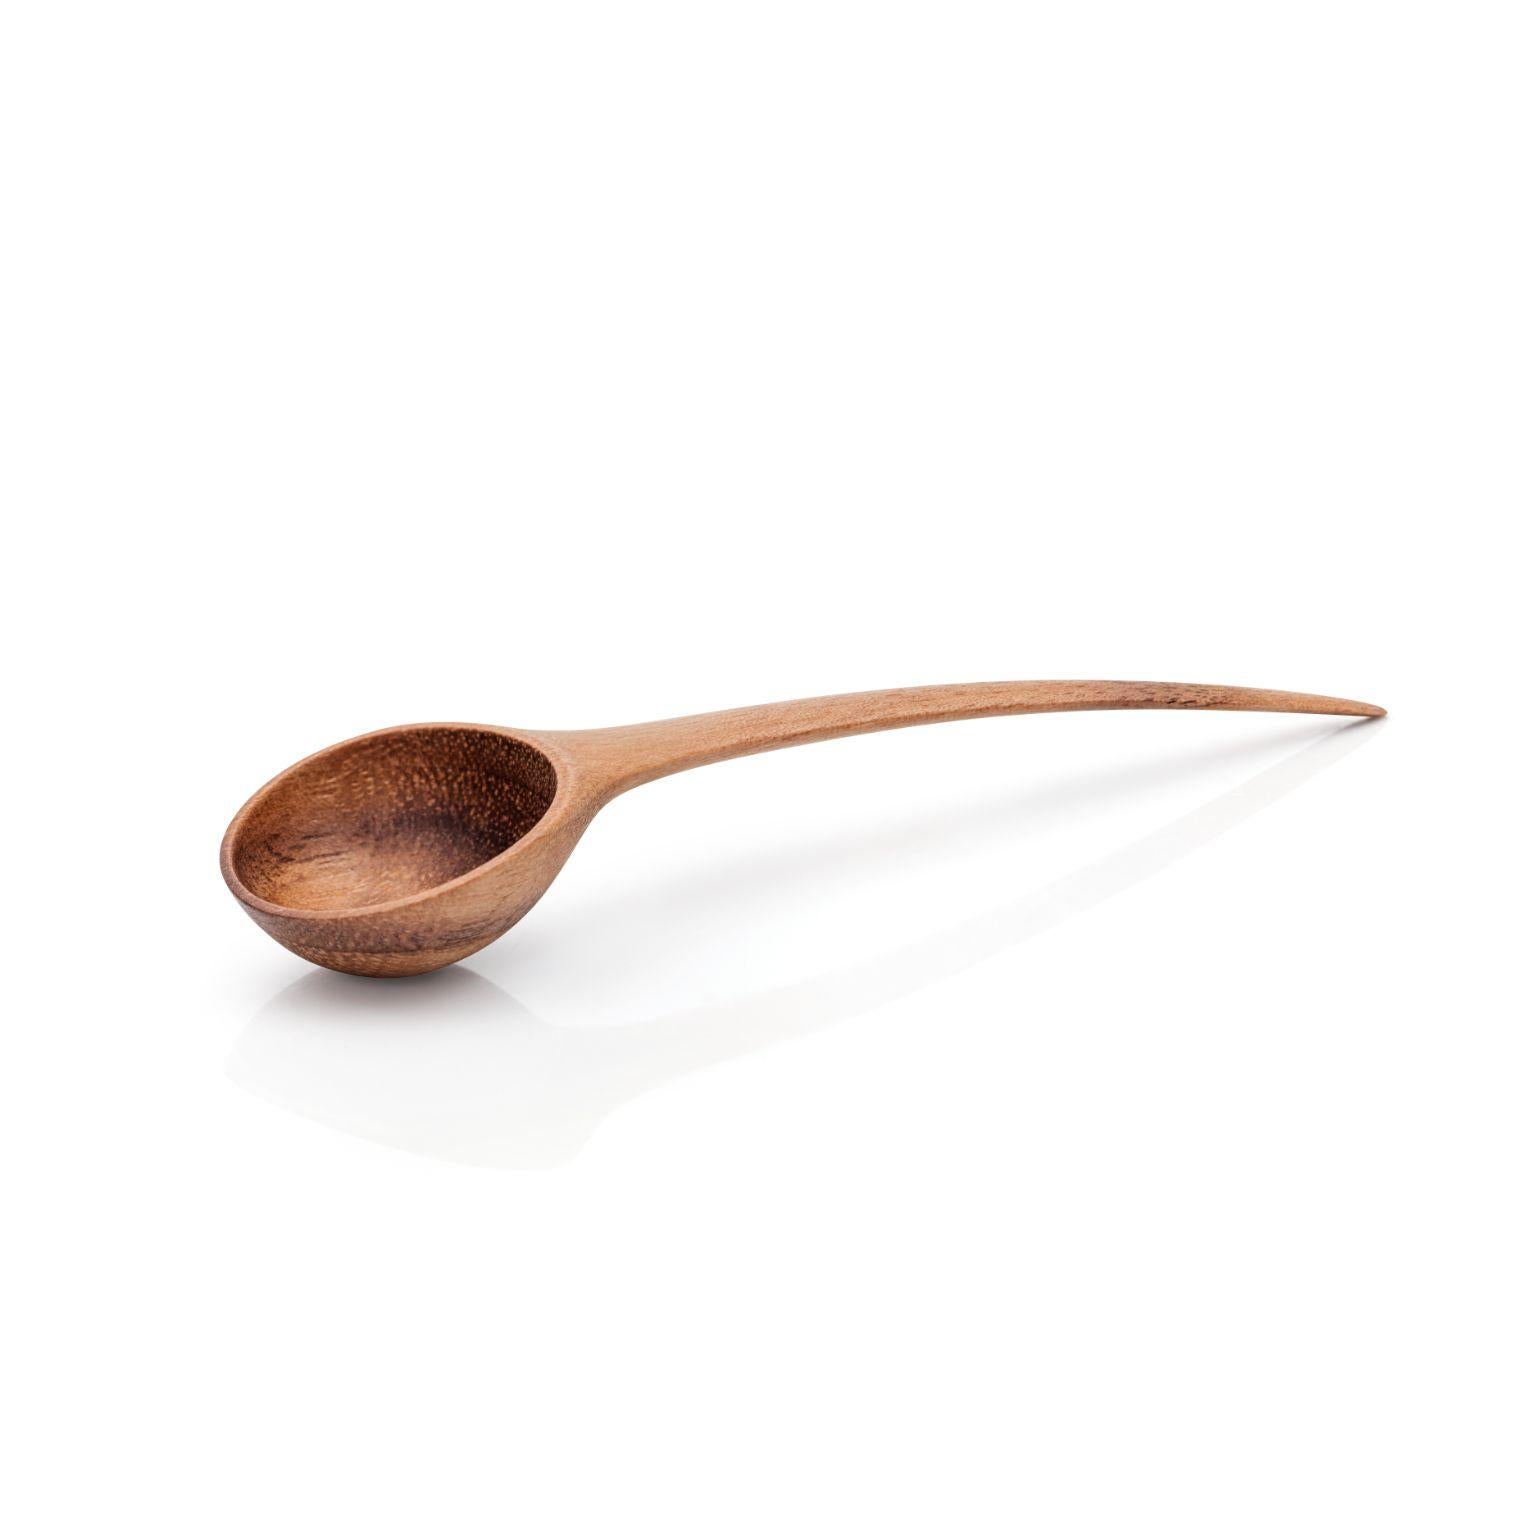 Small Pisara spoon by Antrei Hartikainen
Materials: Walnut, maple, natural oil wax
Dimensions: W 7-10 cm

Also available in three sizes and a variety of woods

This range of small spoons are ideal for serving sugar, salt and other condiments. In